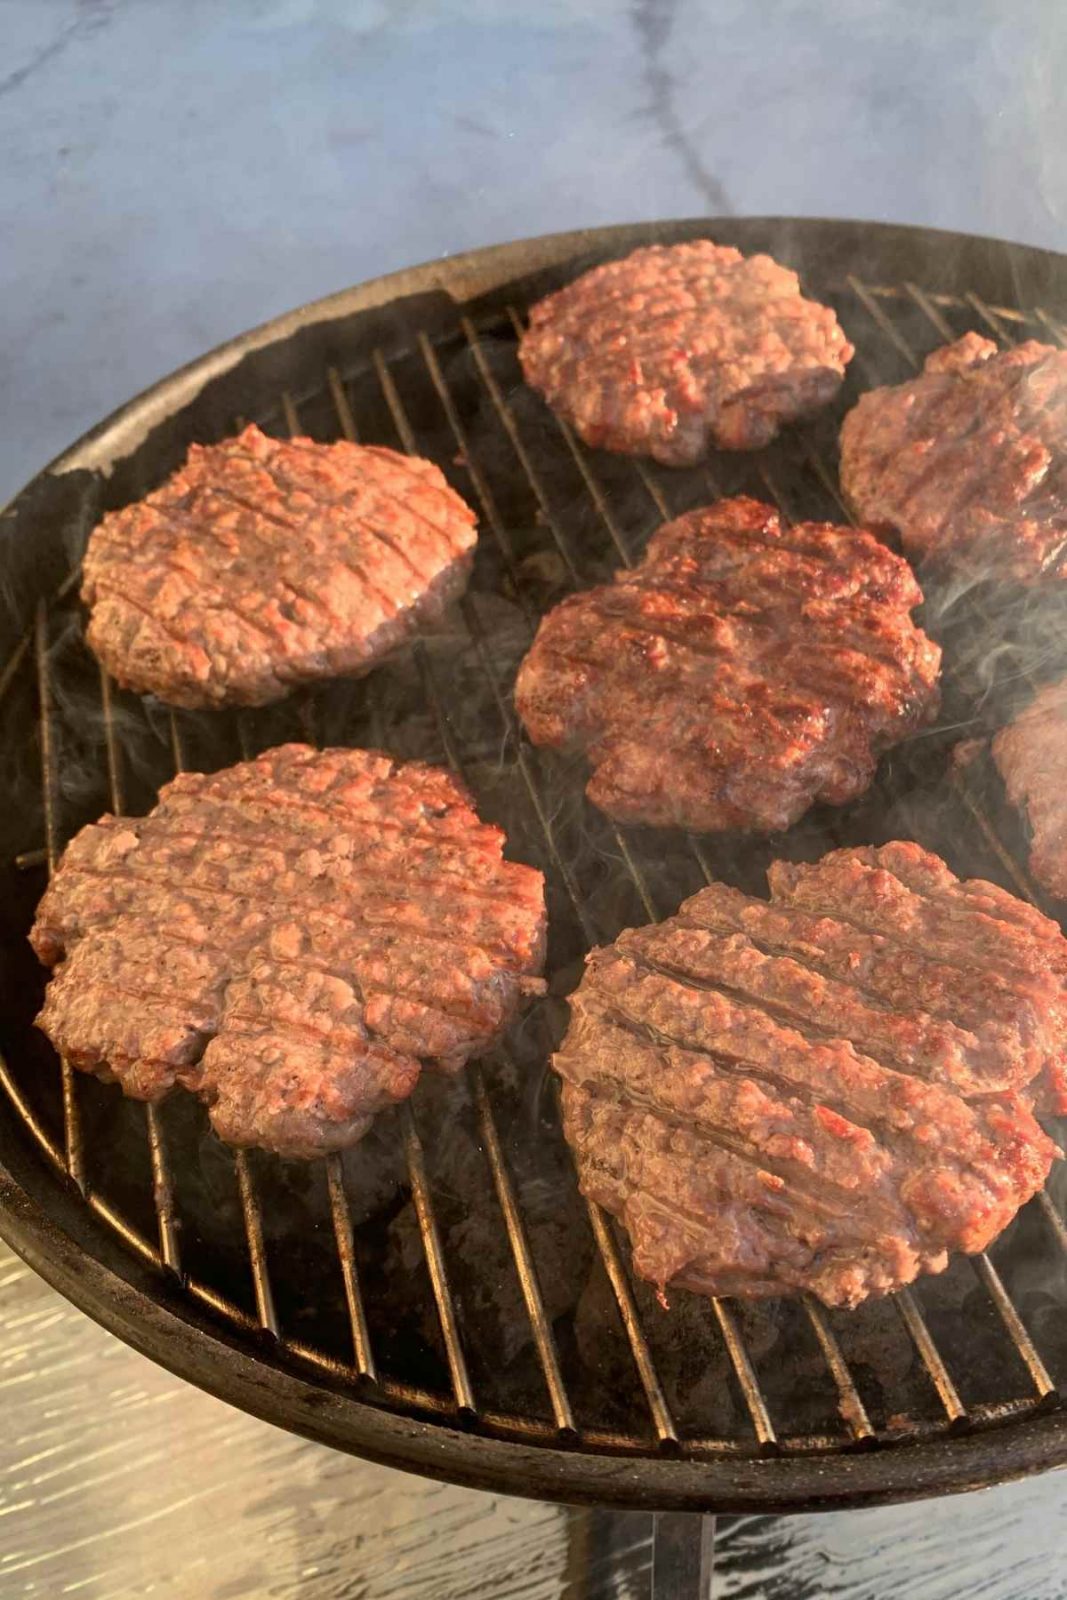 There’s no denying the amazing flavor of a homemade burger eaten right off the grill. It’s juicy, succulent, and just tastes better! If you’re new to grilling or looking to improve your grilling game, follow the burger grill time chart in this post. Say goodbye to dry, overcooked burgers and hello to perfectly juicy grilled burgers every time.